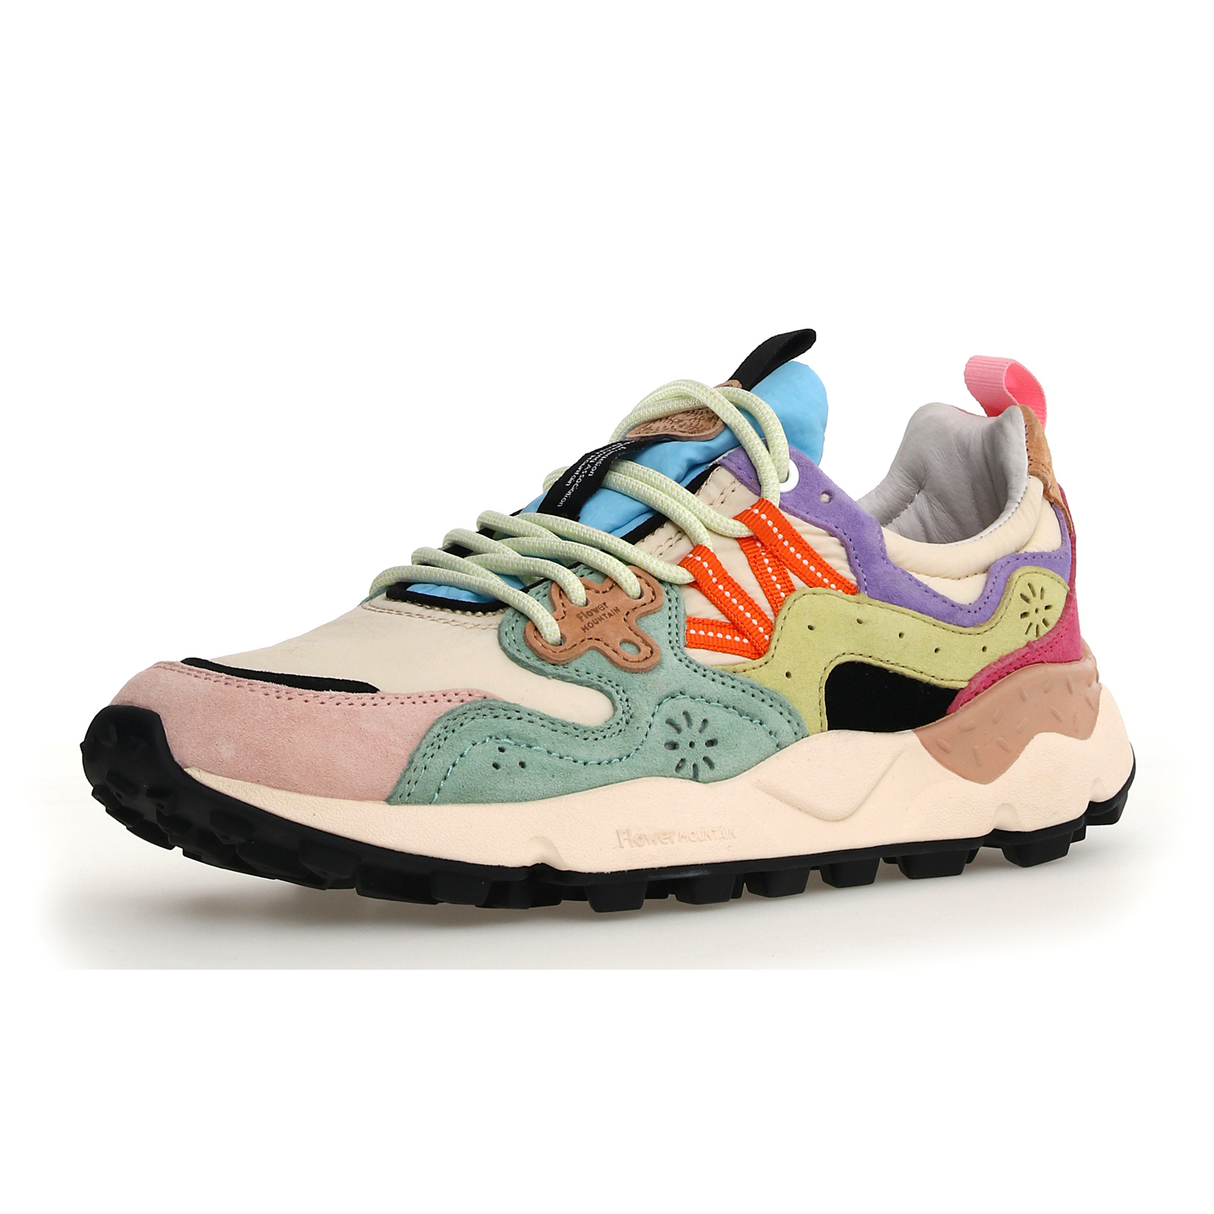 Flower Mountain Yamano 3 Sneaker (Unisex) - Pink/Beige/Light Green Athletic - Casual - Lace Up - The Heel Shoe Fitters